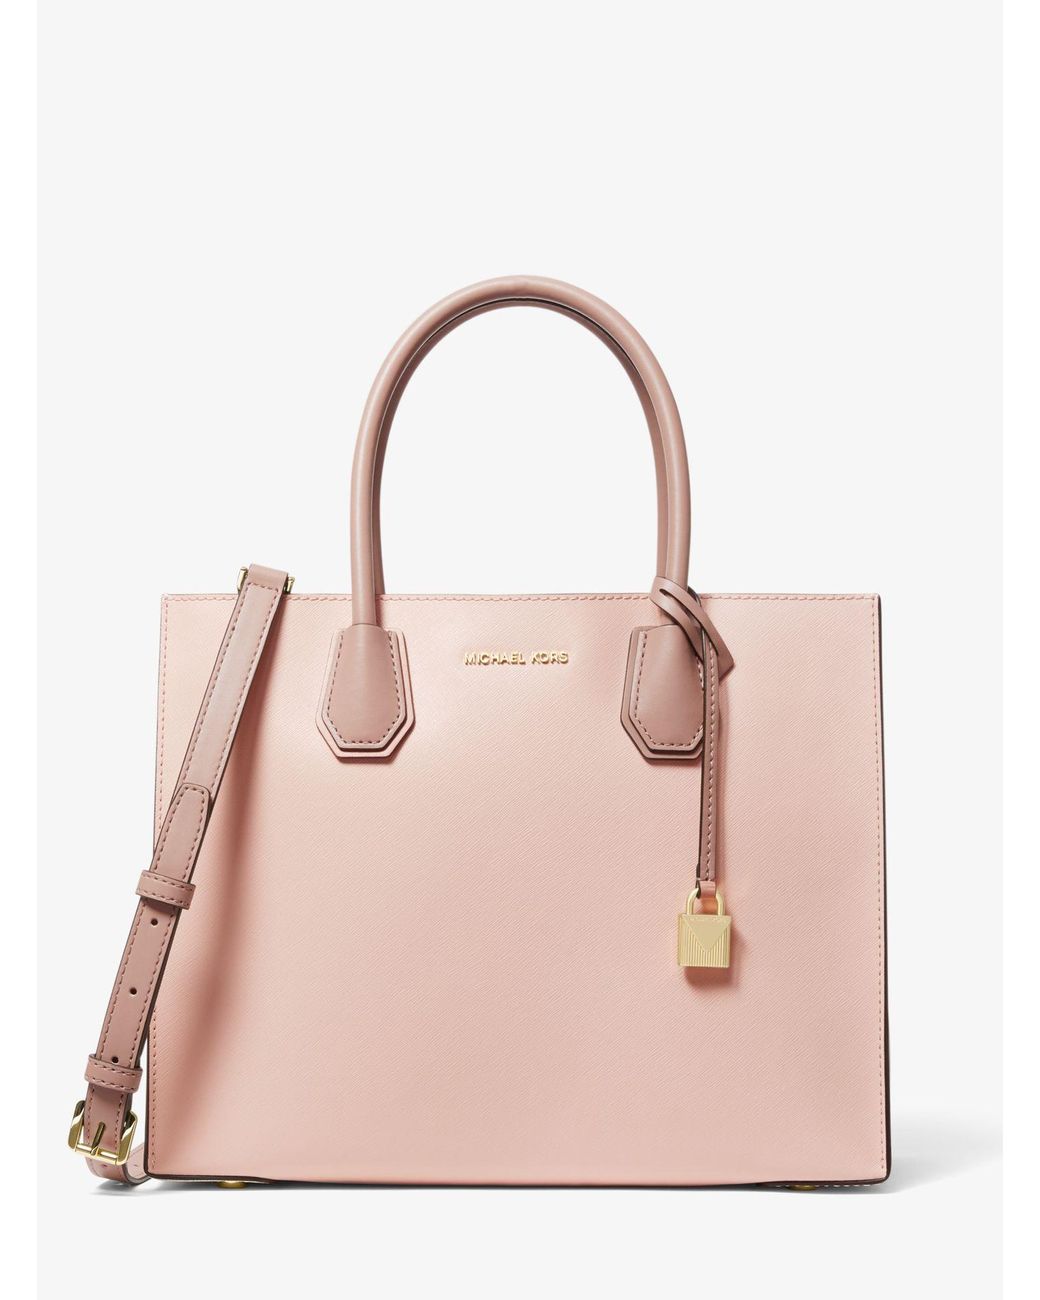 Michael Kors Mercer Large Color-block Saffiano Leather Tote Bag in Pink